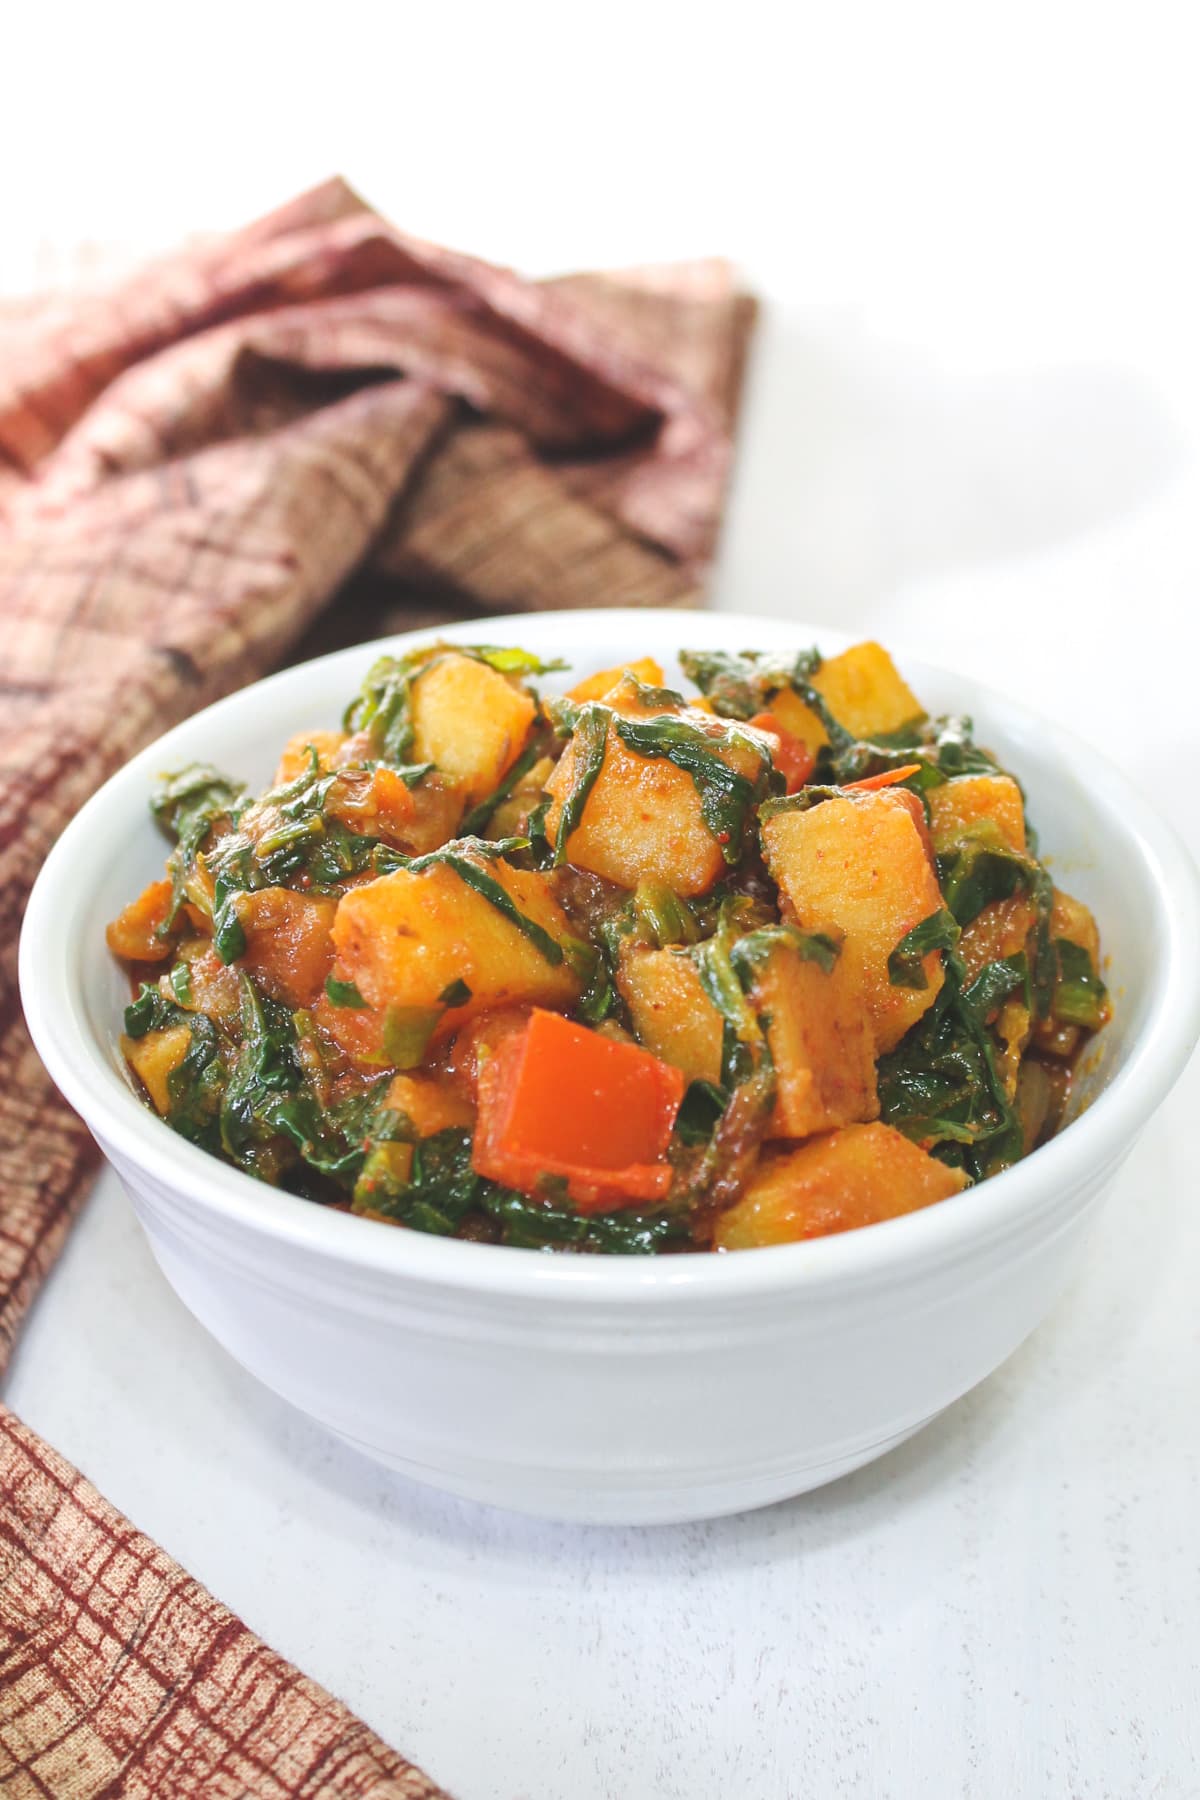 Palak sabzi in a white bowl with brown napkin on the side.